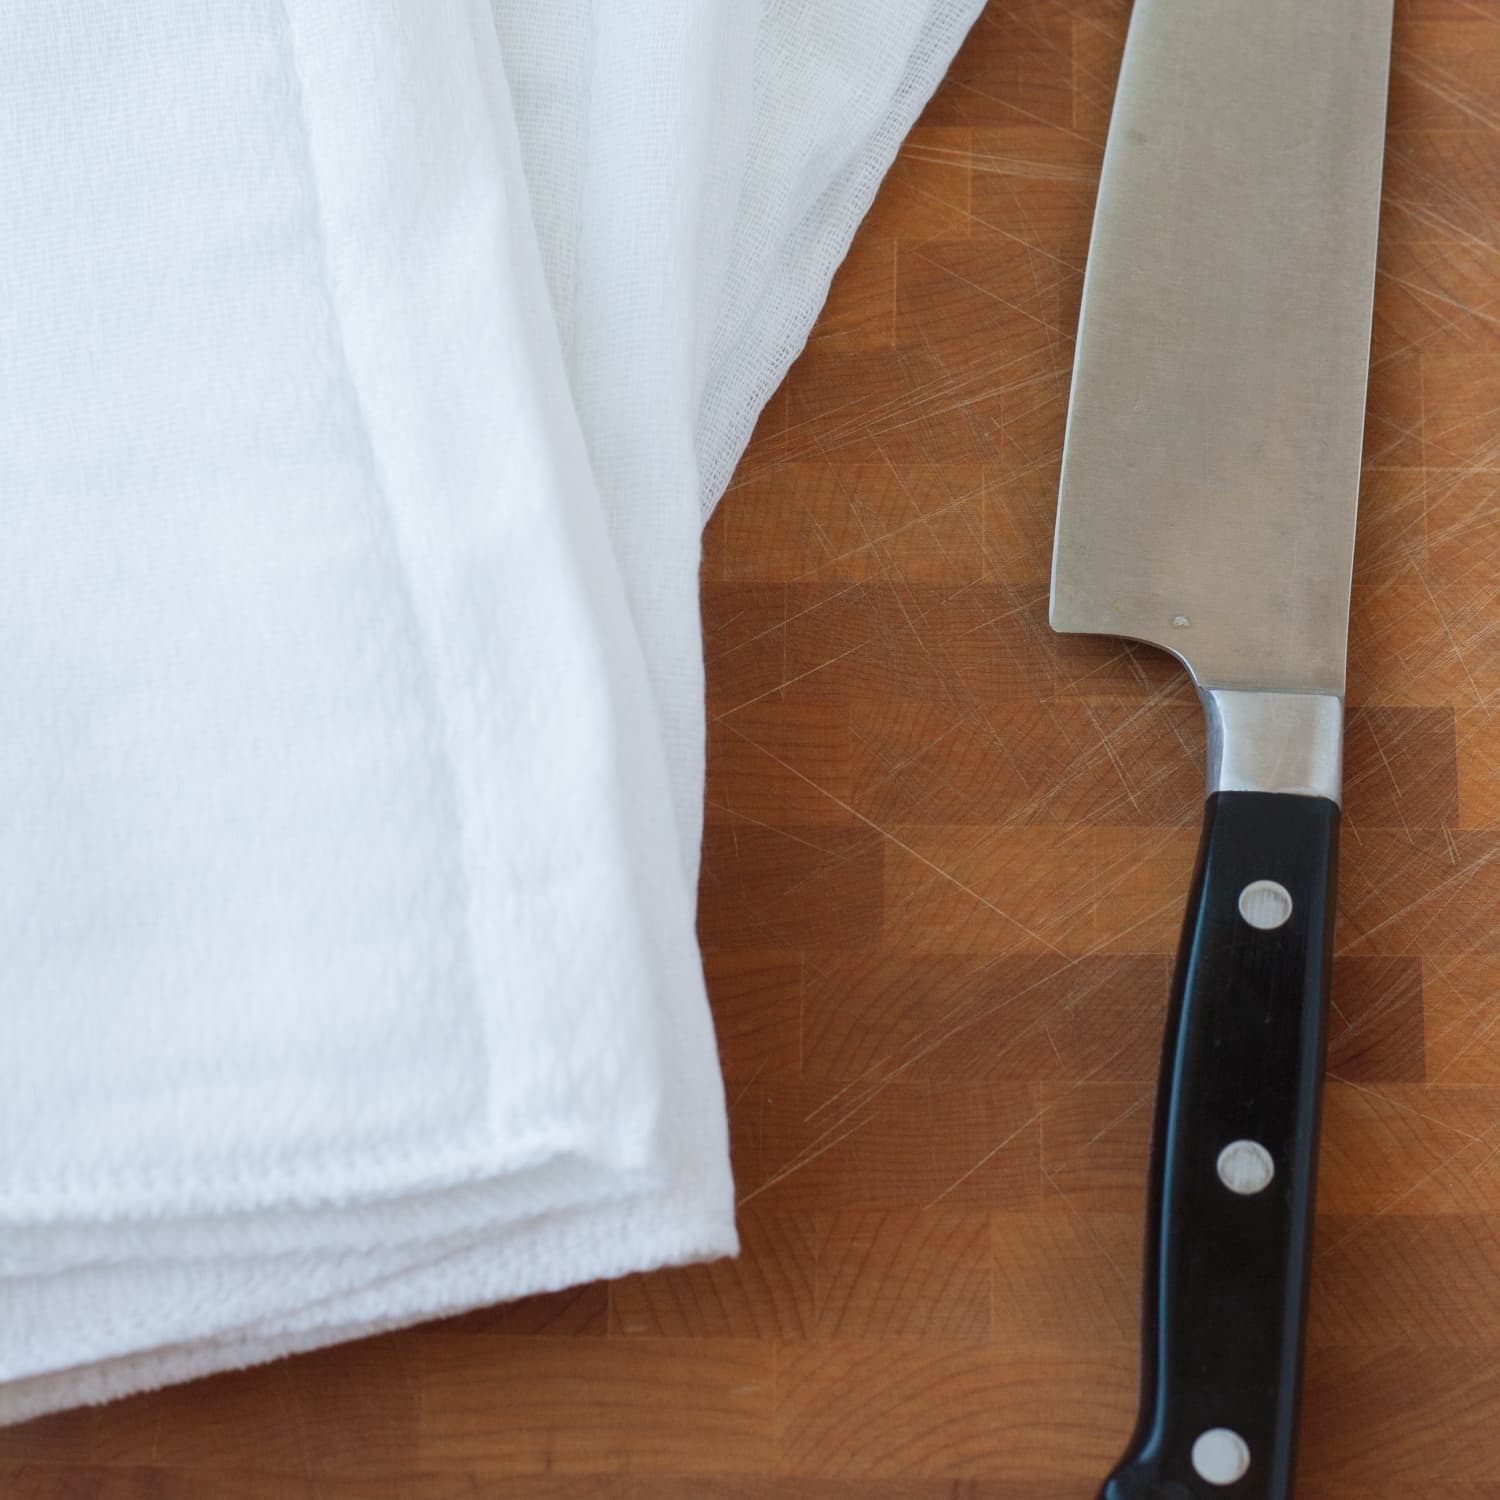 These Are The Best Kitchen Towels For Less Than $2